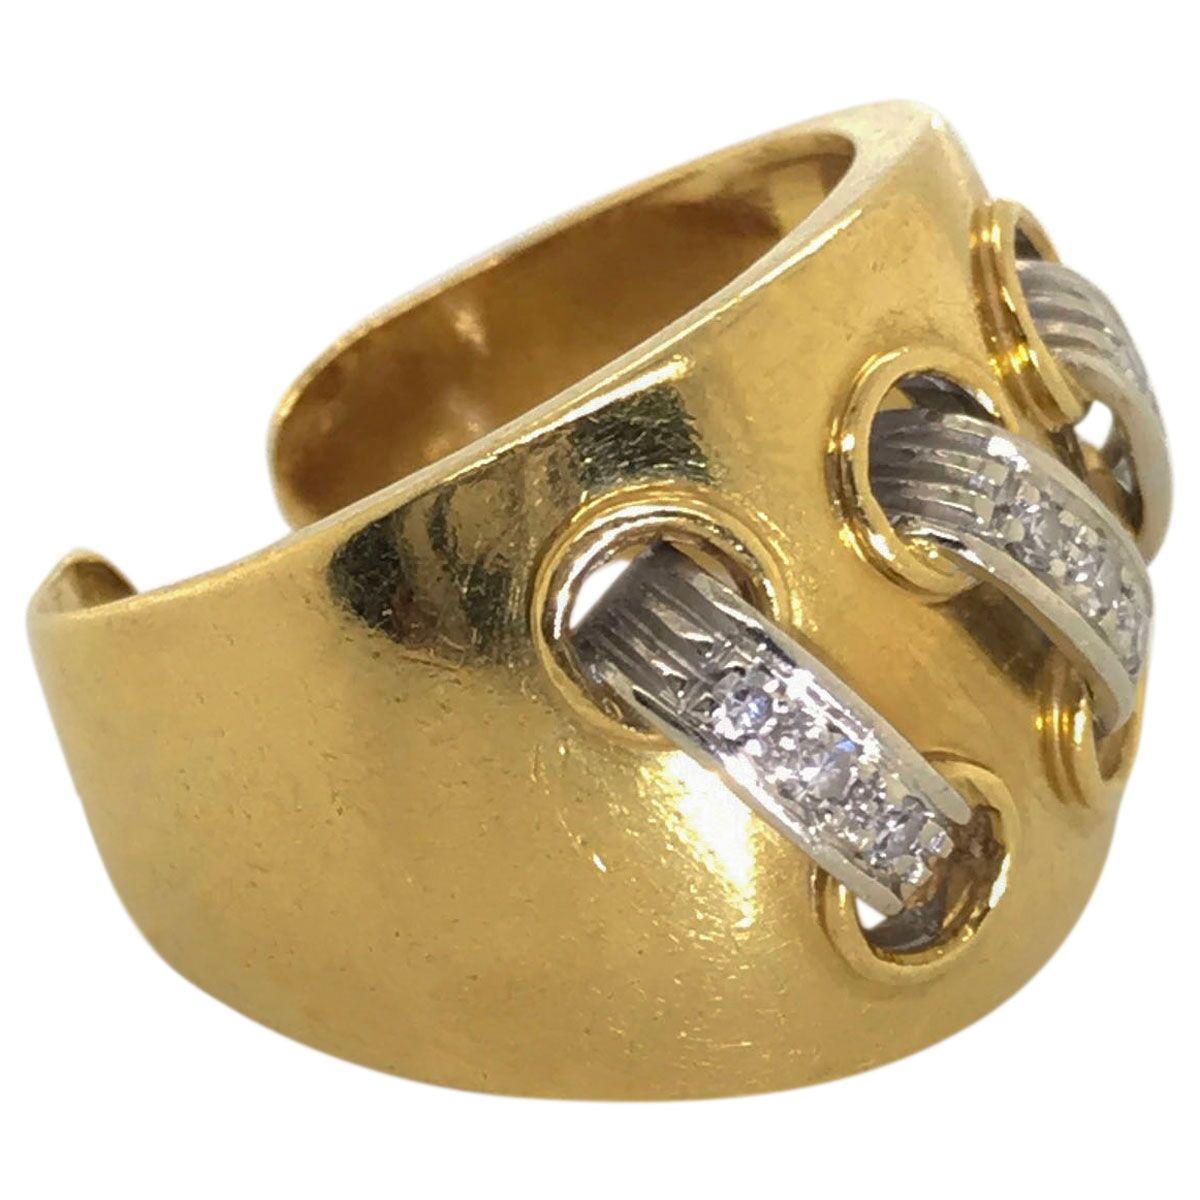 Cartier chic! This fabulous and stylish 'Lace Up' ring is designed with an open back so it can be resized to suit but it's best worn on the middle finger for a super cool look. Fashioned in 18k yellow and white gold, it is designed as a wide ring